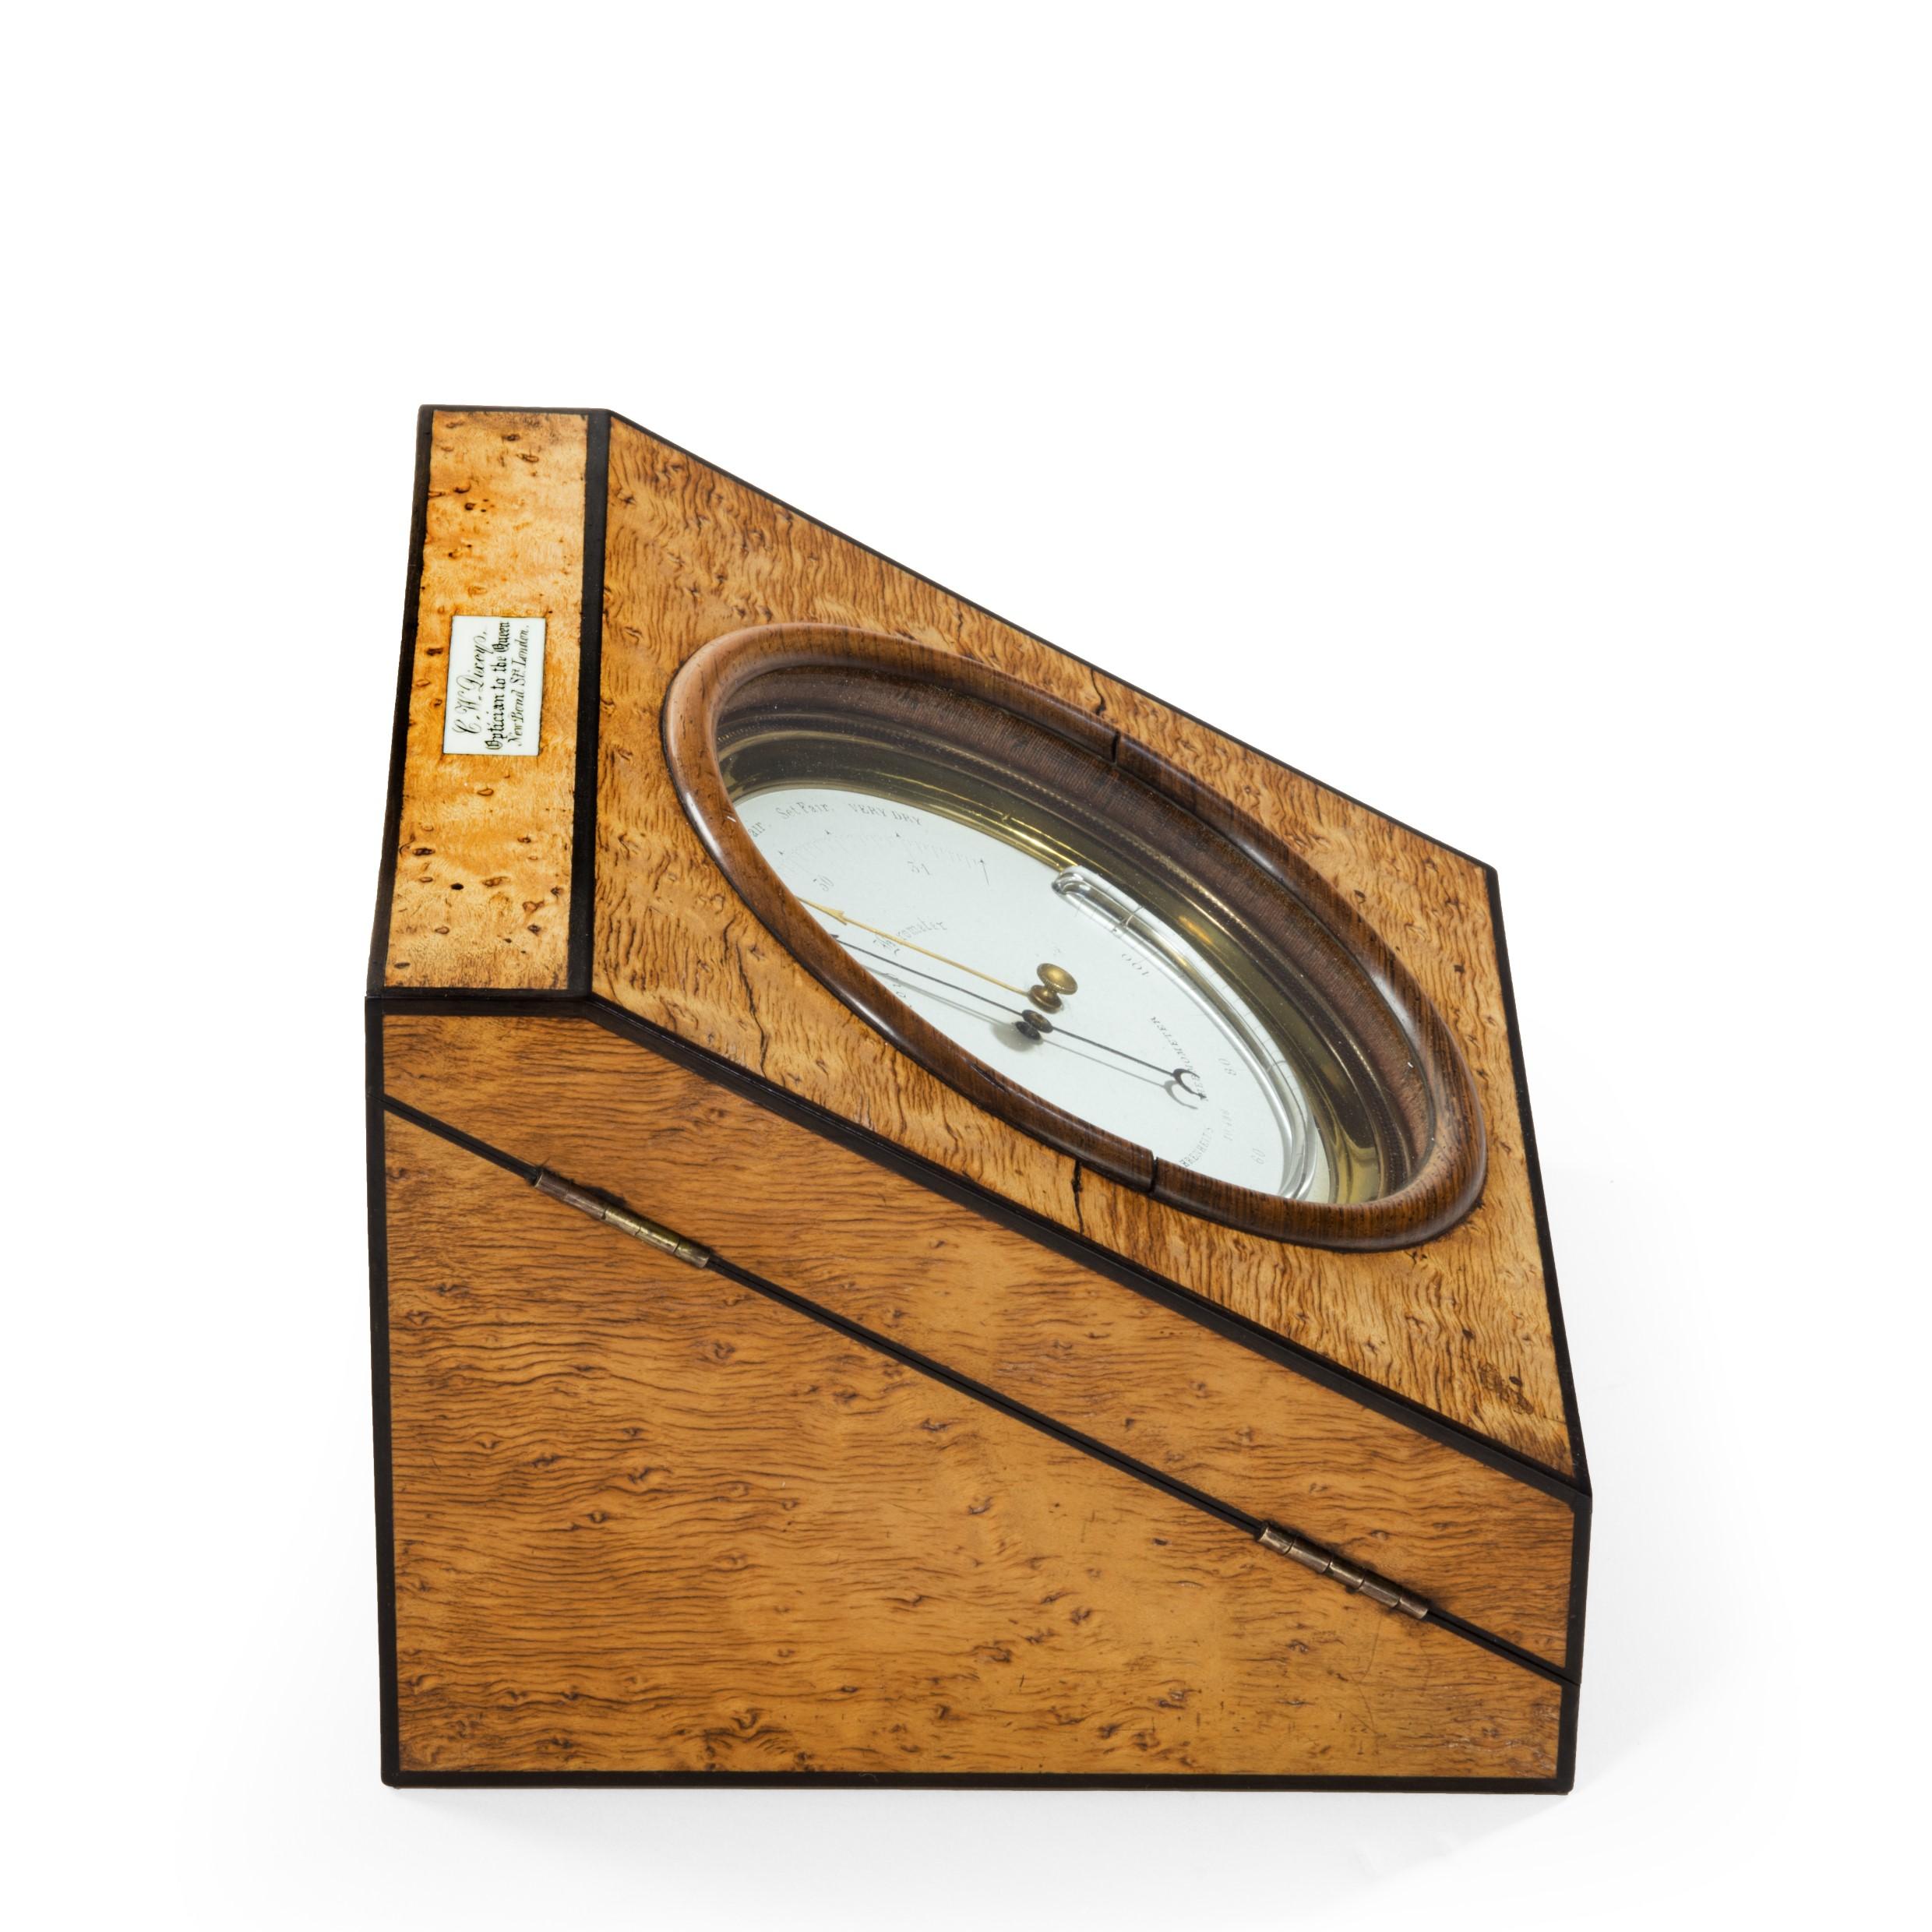 Aneroid Desk Barometer by C W Dixey In Good Condition For Sale In Lymington, Hampshire